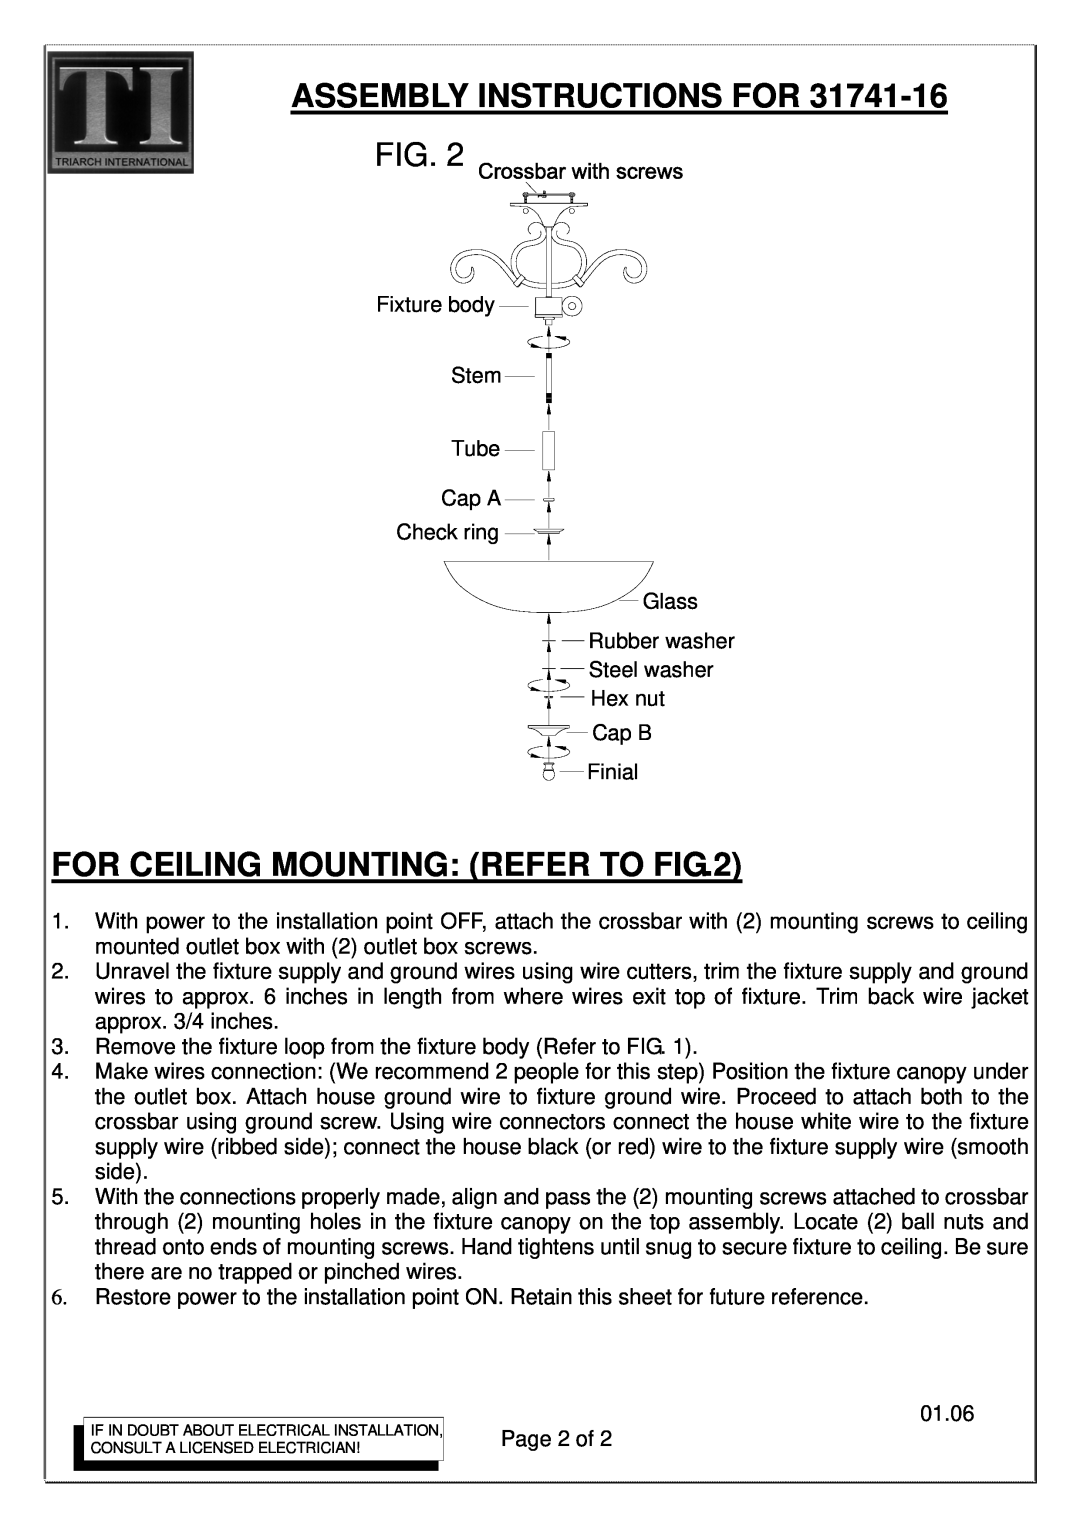 Triarch 31741/16 manual For Ceiling Mounting Refer To, Assembly Instructions For 